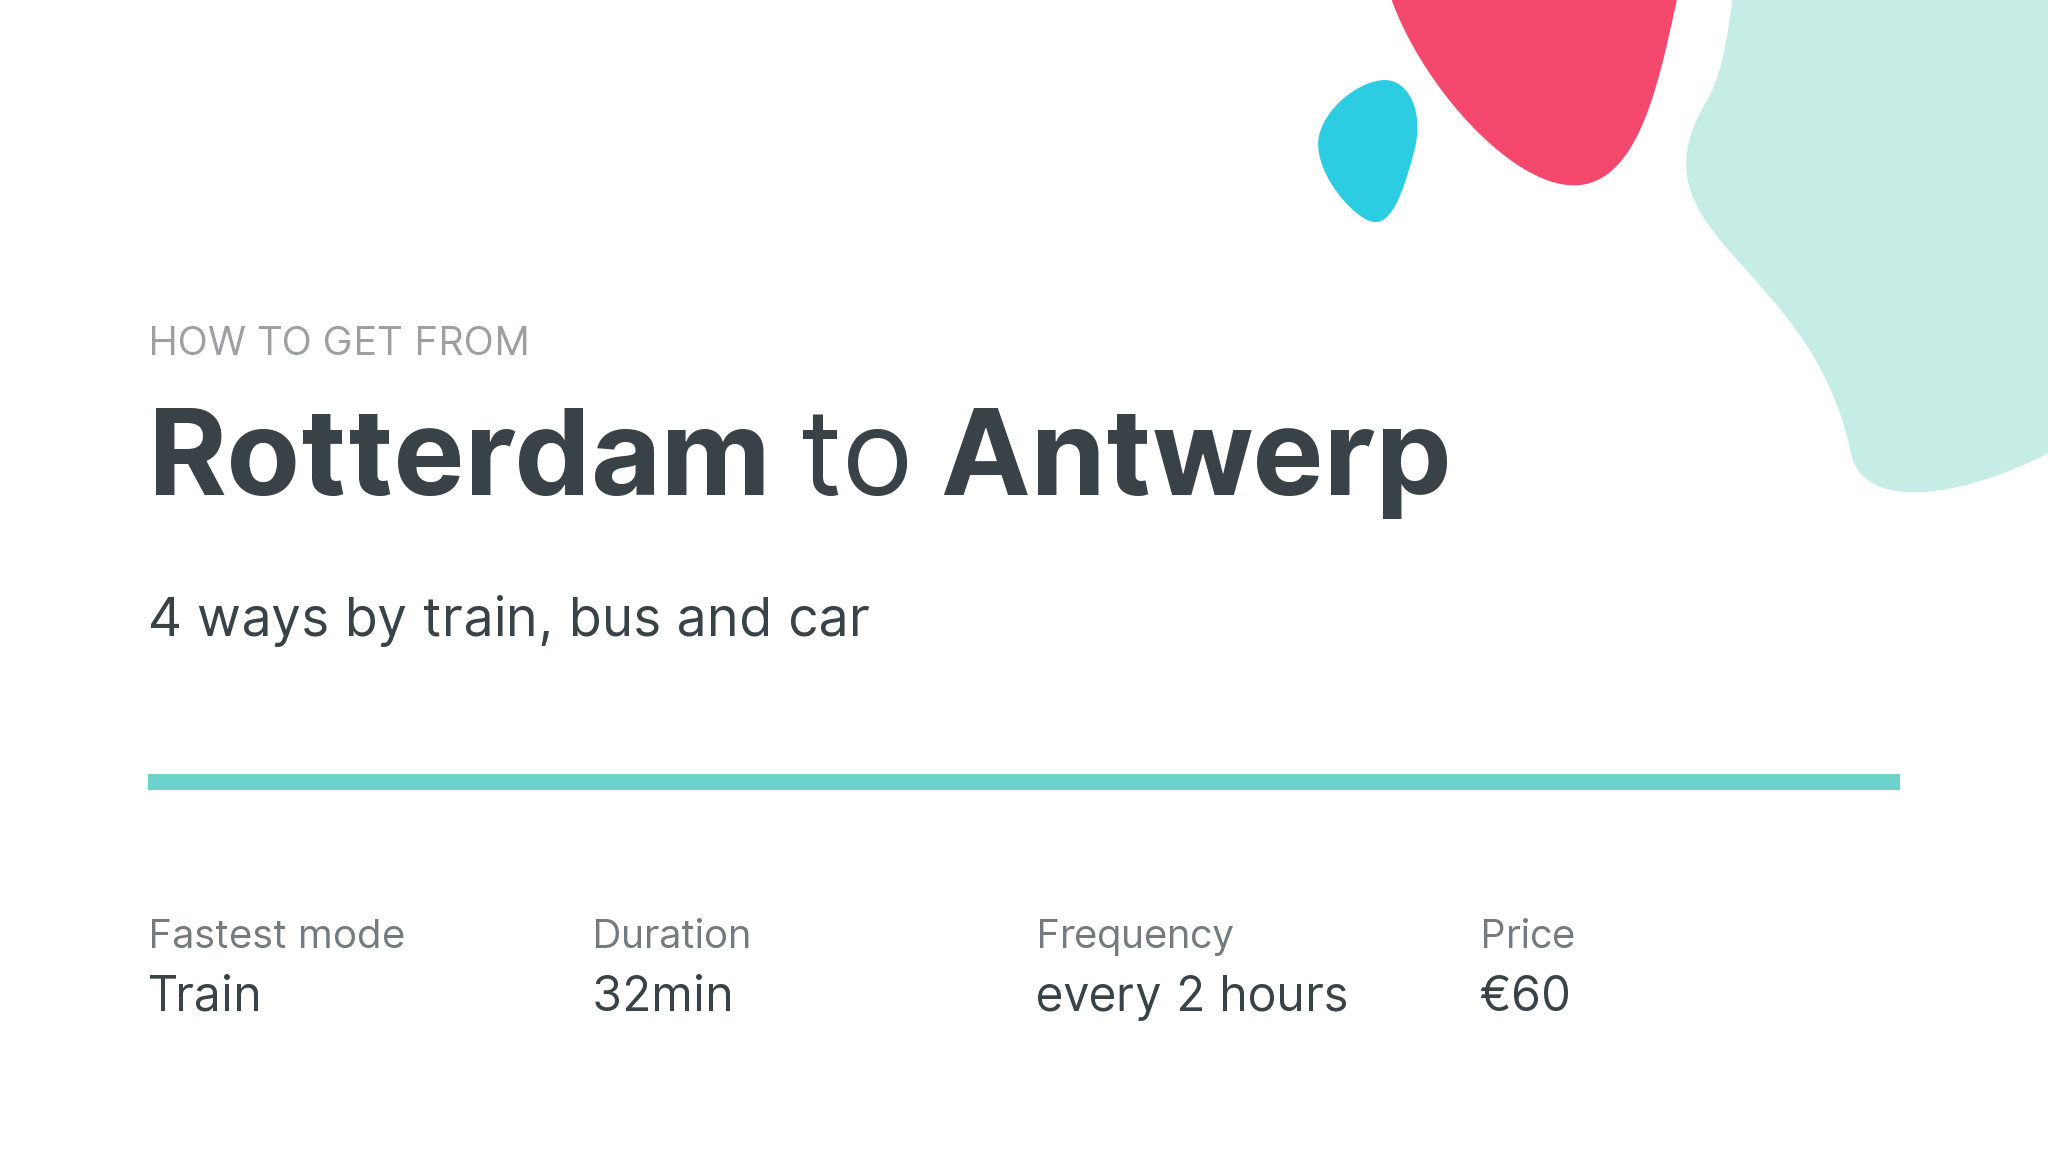 How do I get from Rotterdam to Antwerp